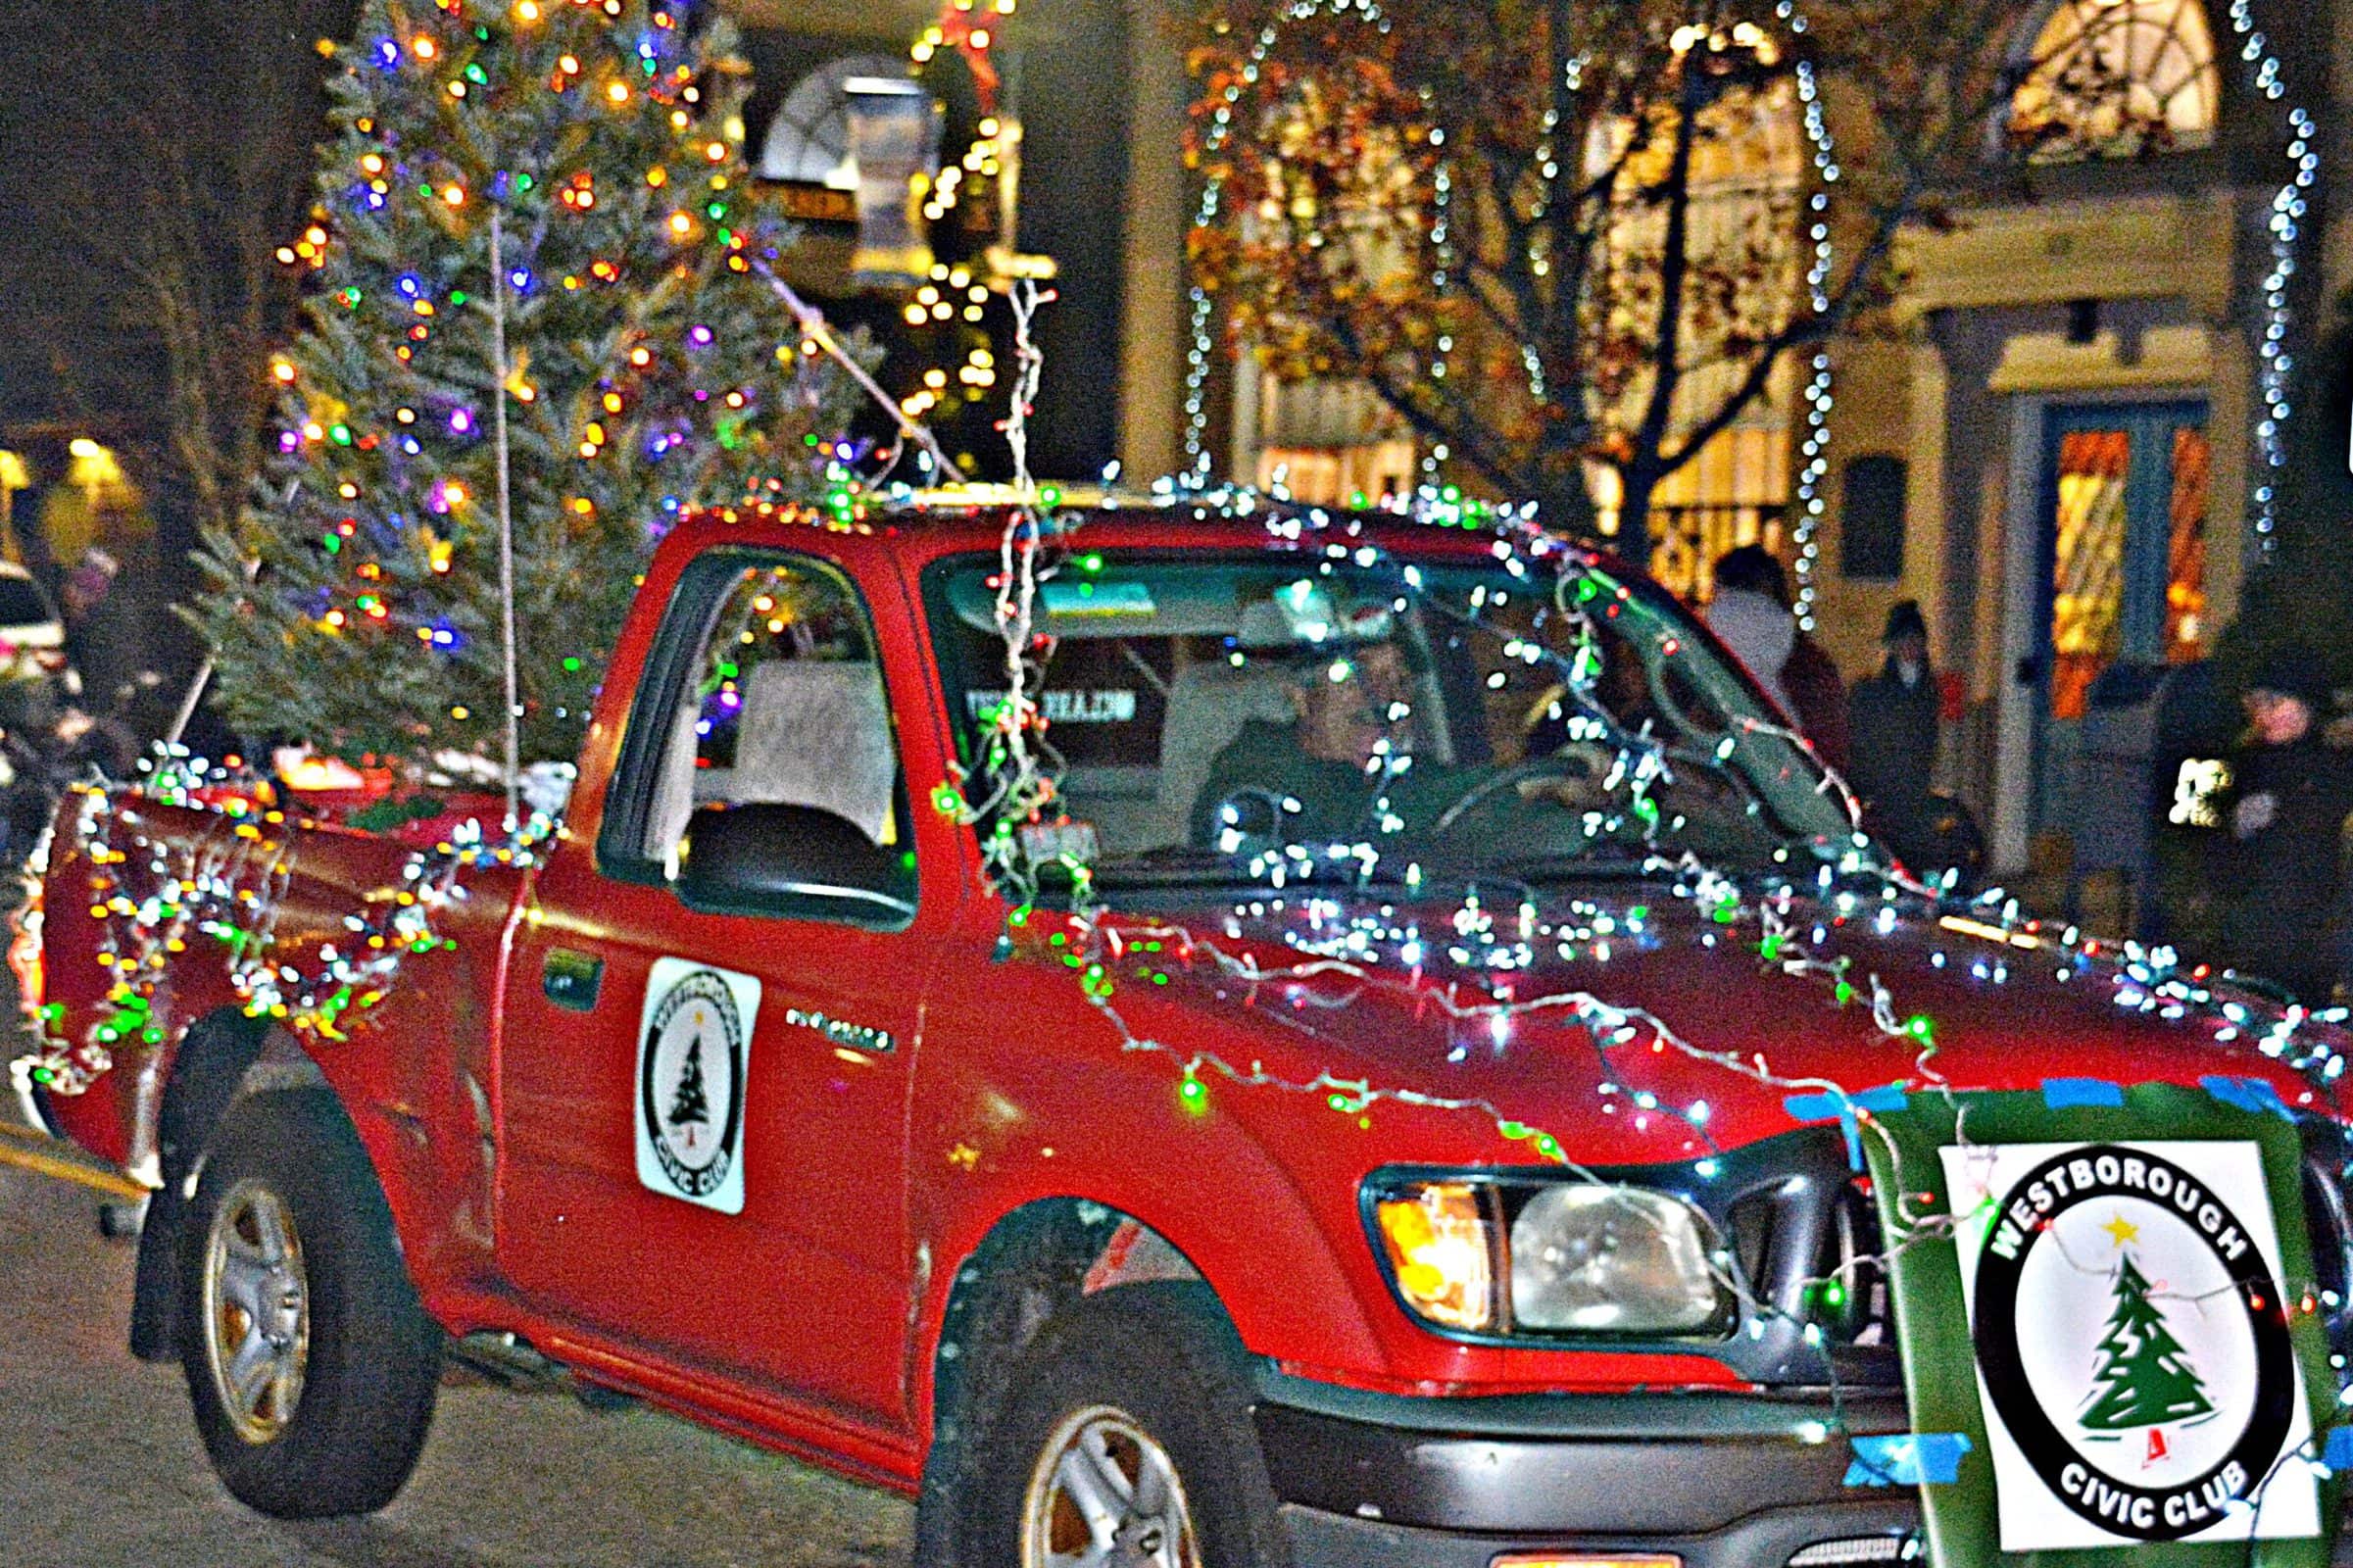 Westborough prepares for winter with stroll, parade, tree lighting